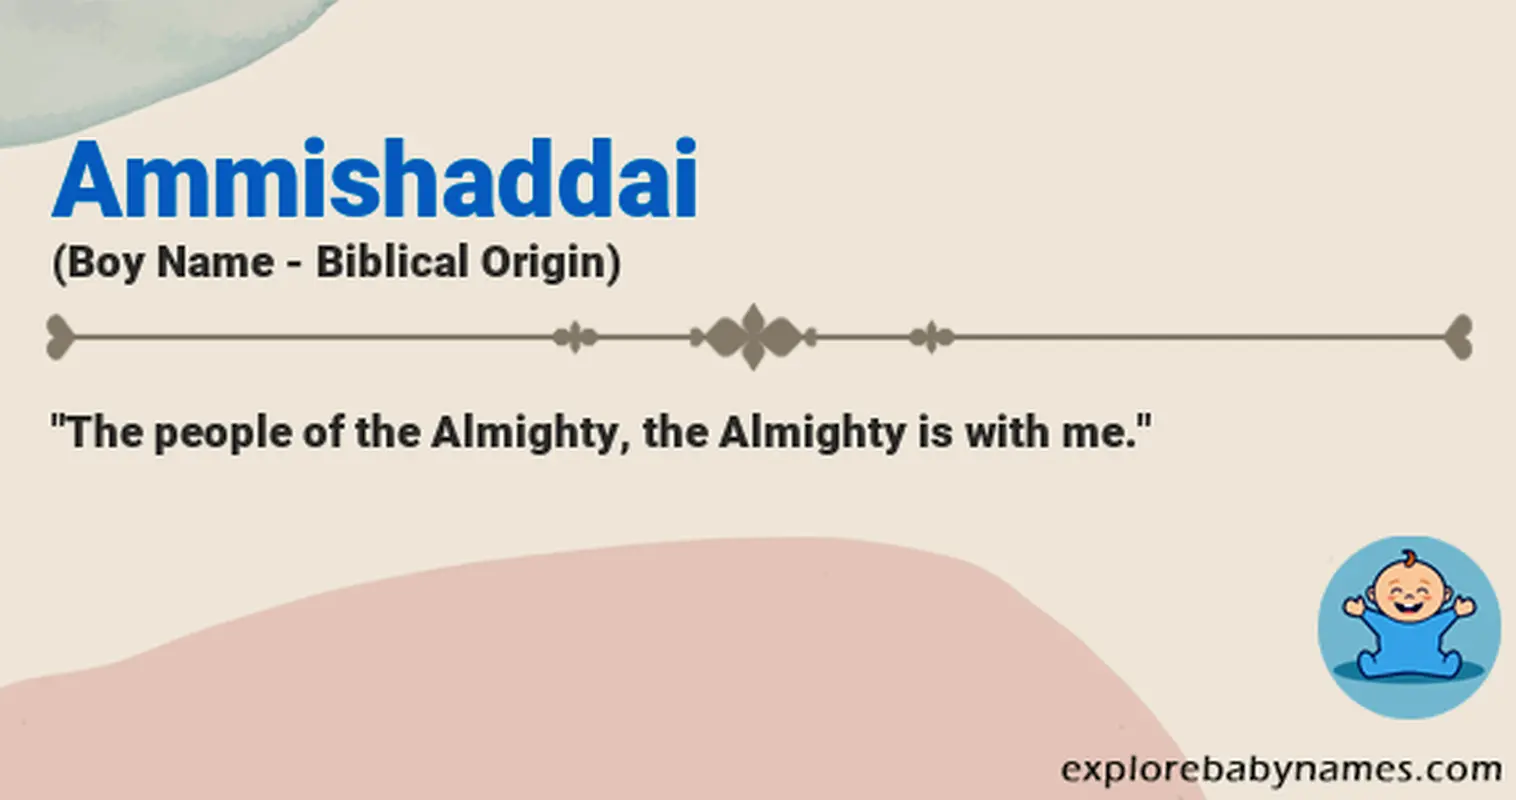 Meaning of Ammishaddai